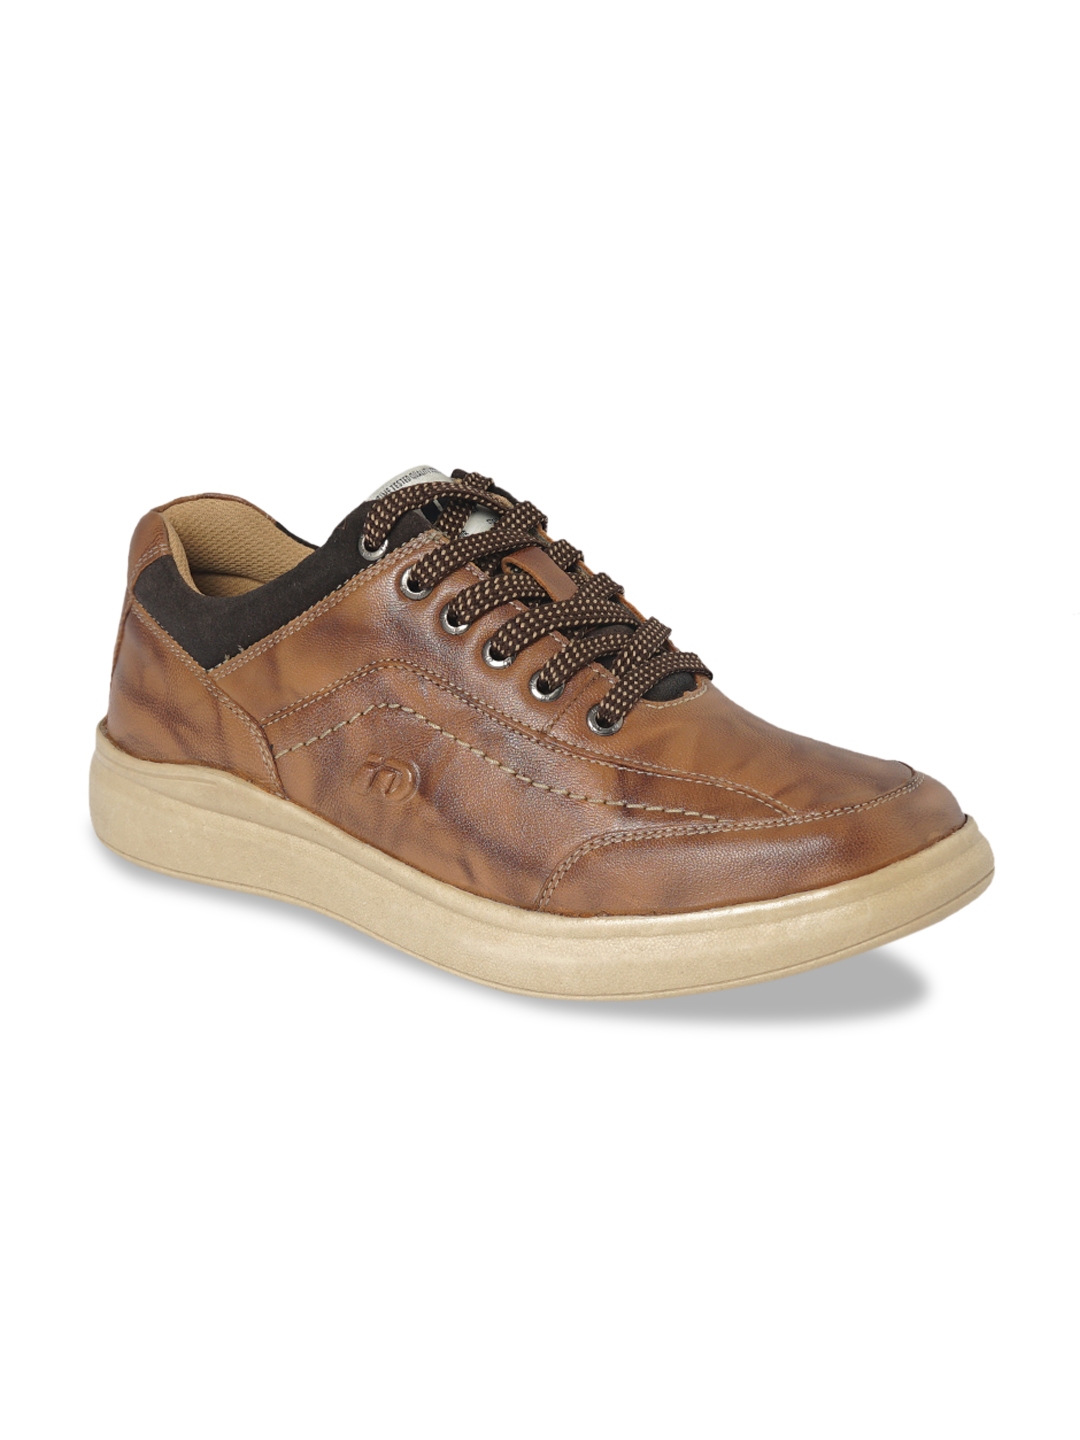 Buy ID Men Tan Brown Genuine Leather Sneakers - Casual Shoes for Men ...